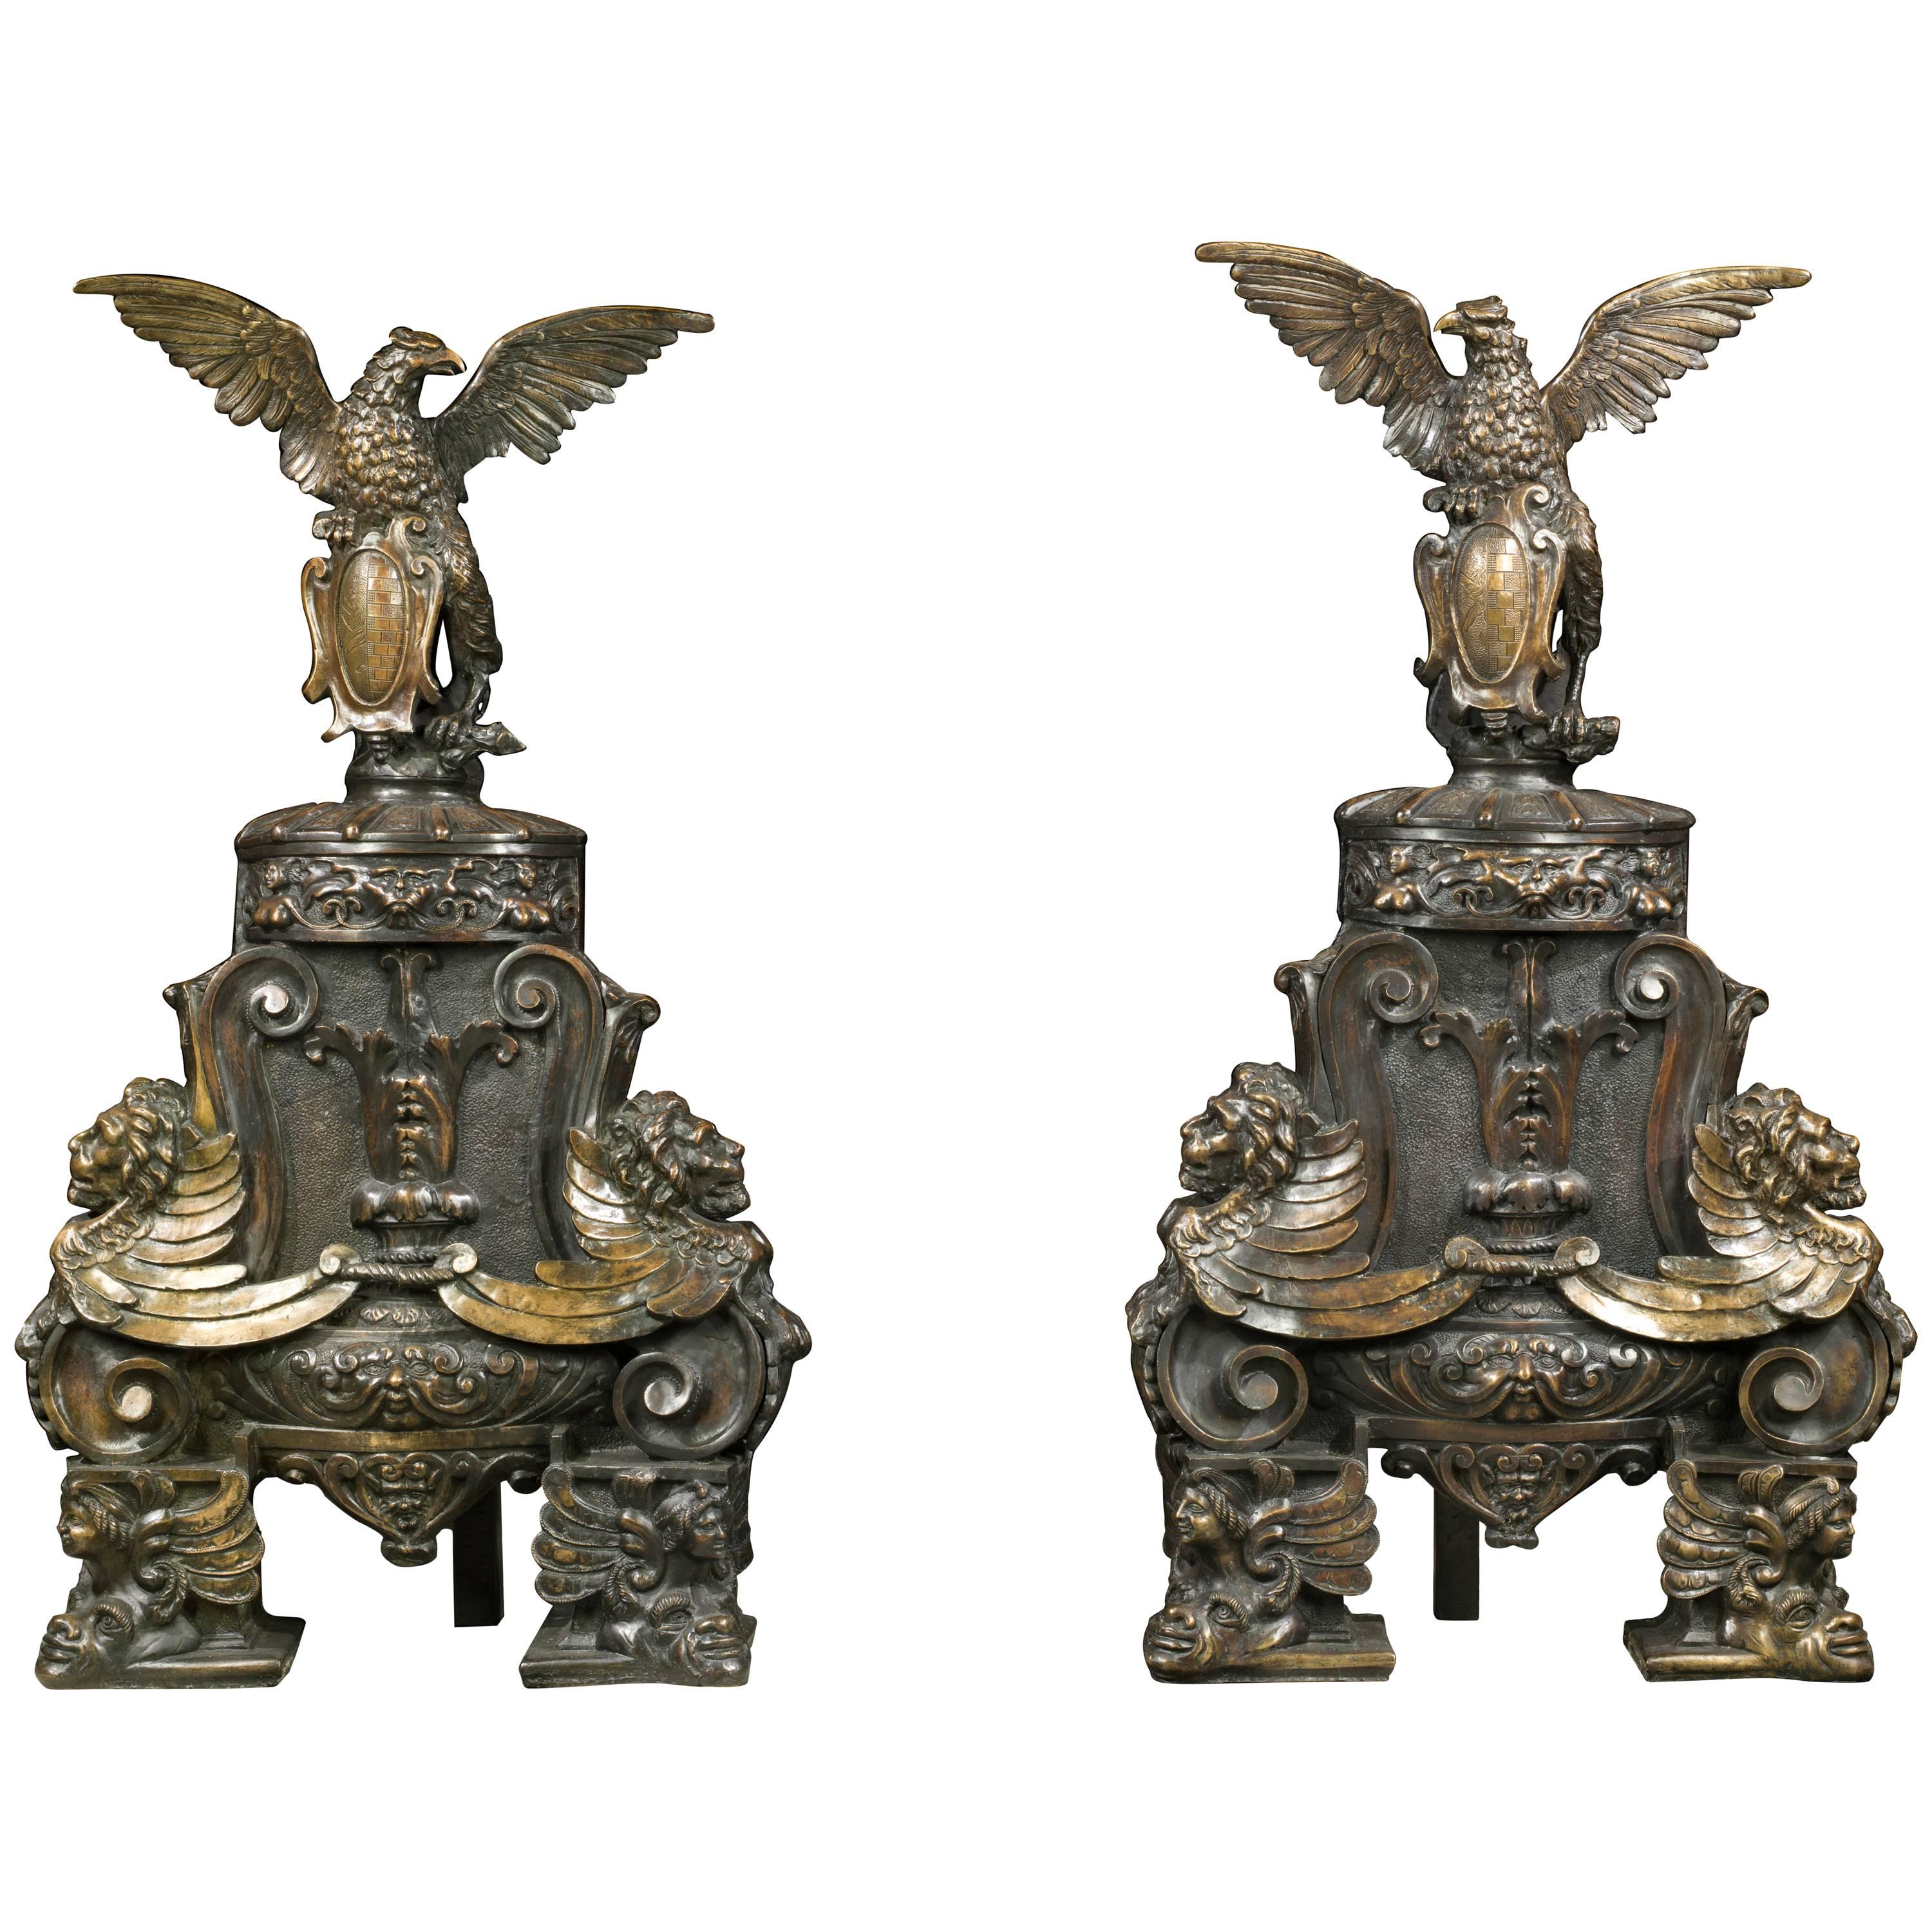 Monumental Pair of Patinated Bronze Andirons in the Baronial Baroque Manner